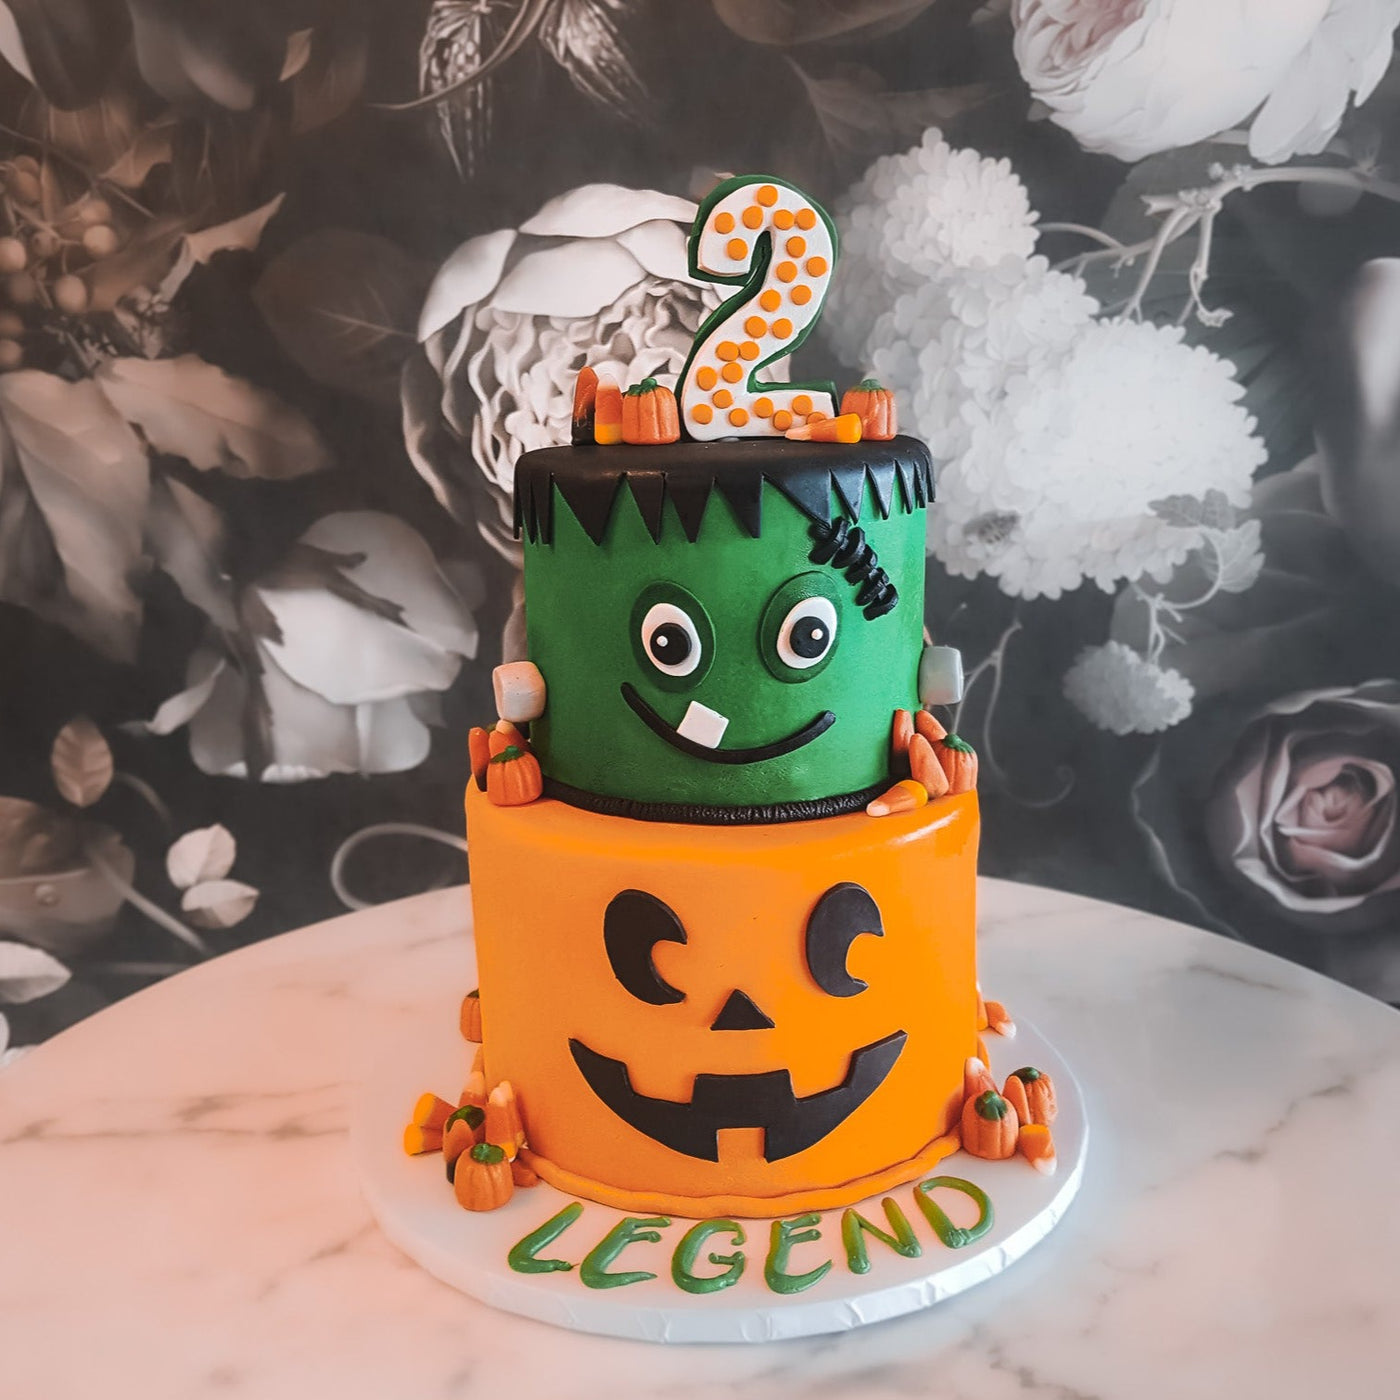 30 Best Halloween Cakes and Spooky Recipe Ideas - Insanely Good